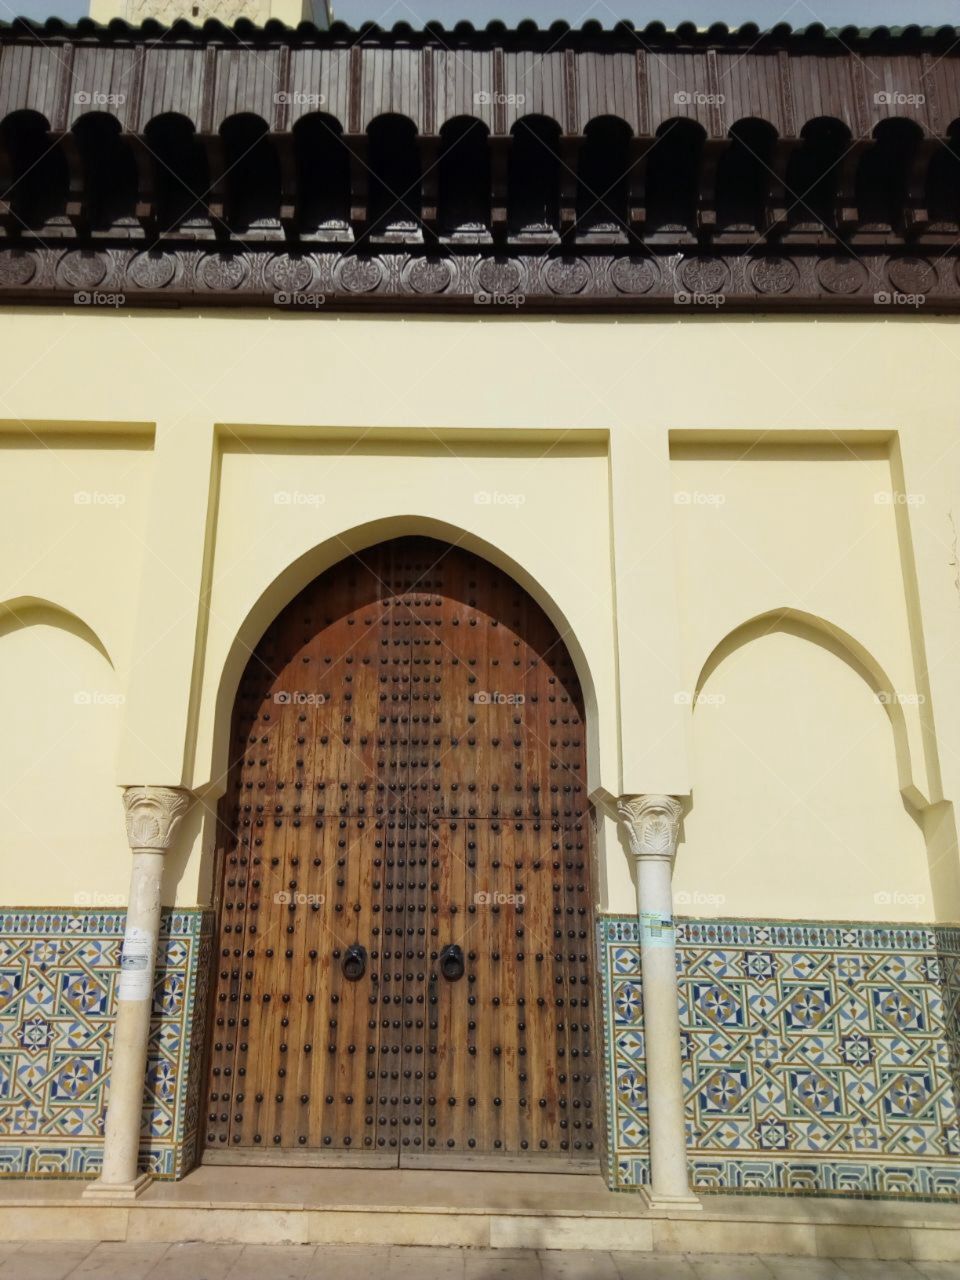 This picture embodies the art of sculpture at the doors and the culture of Morocco emerged